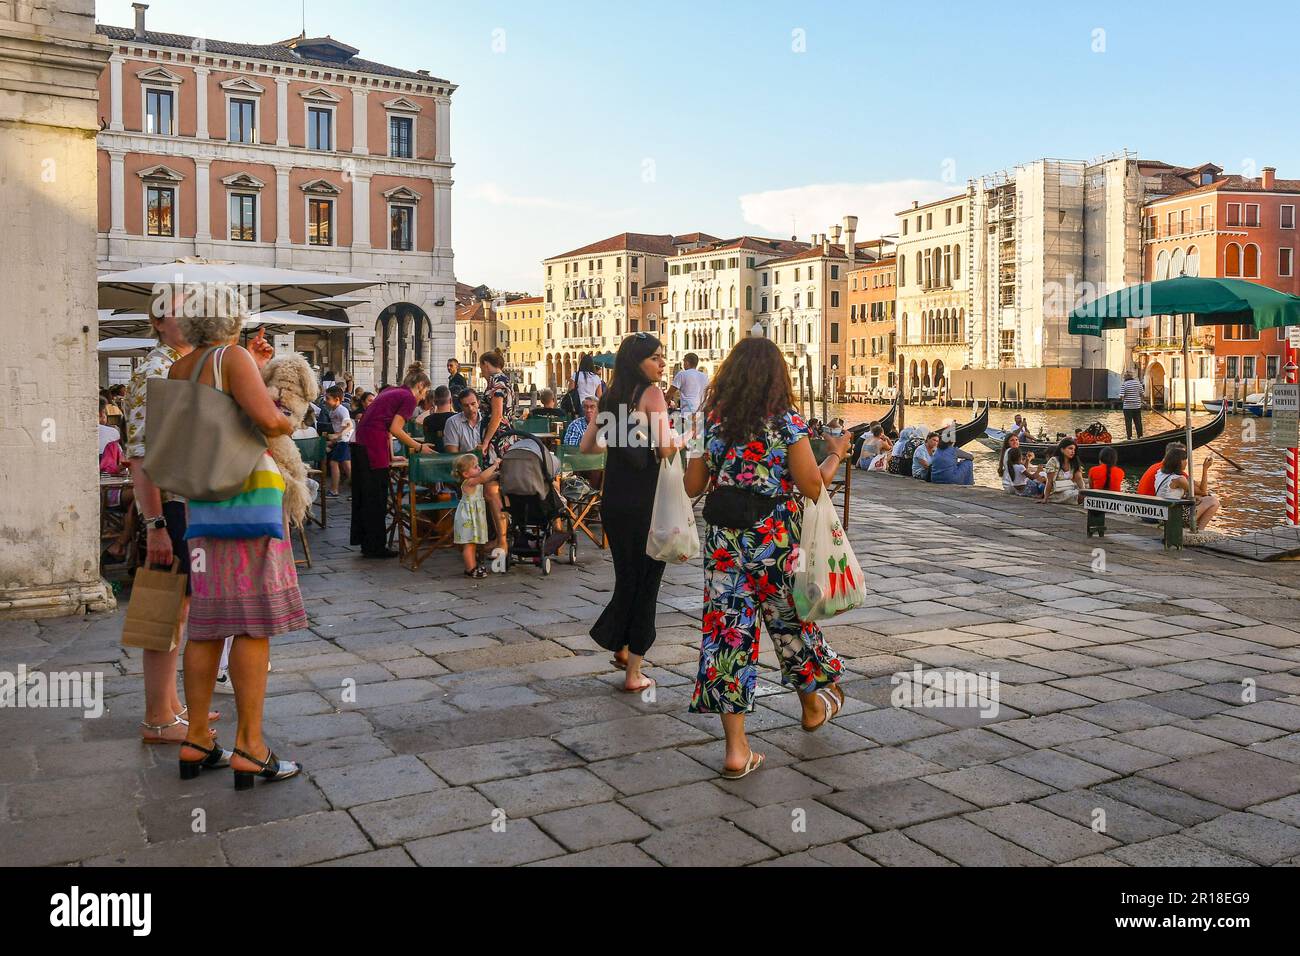 Campo dell'Erbaria square overlooking the Grand Canal during the crowded evening happy hour, Venice, Veneto, Italy Stock Photo